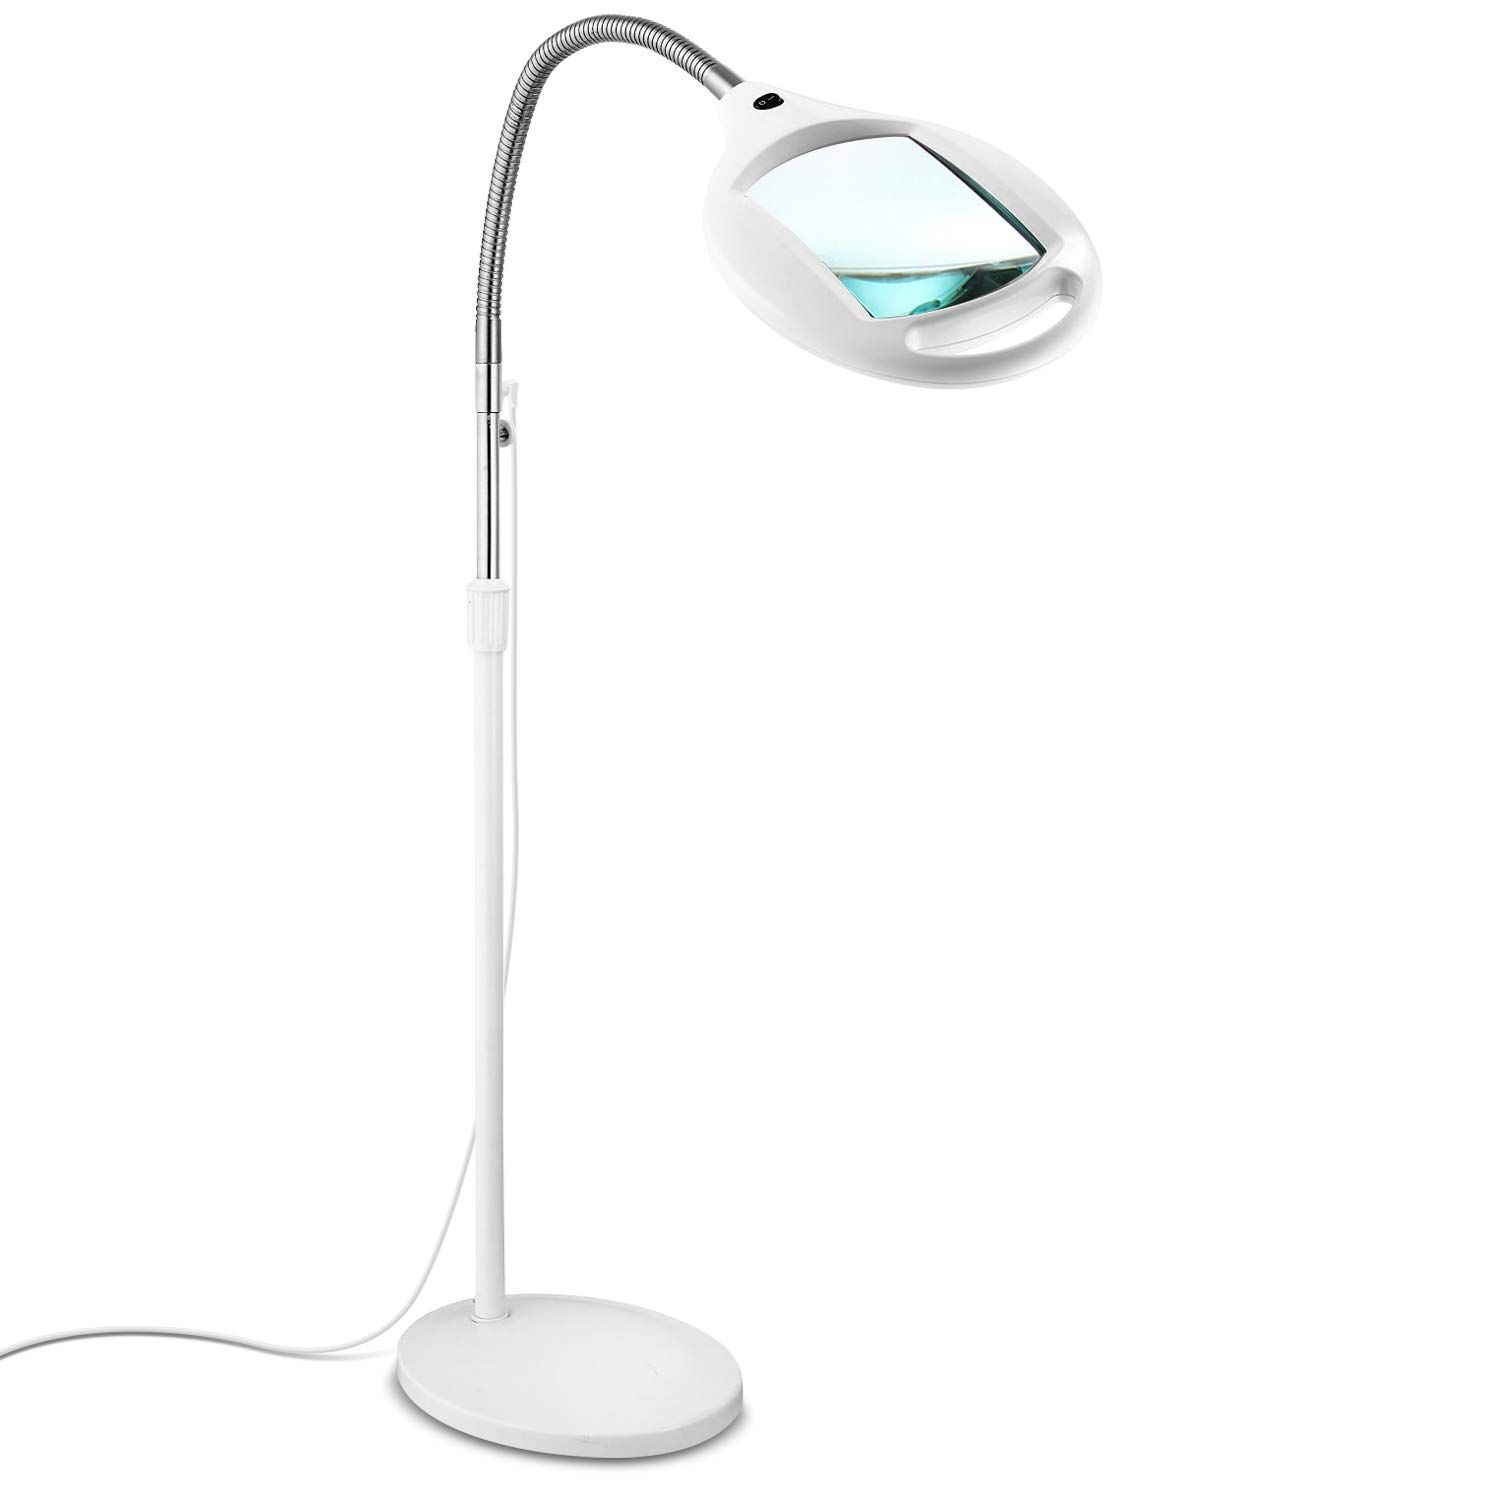 Brightech Lightview Pro Led Magnifying Floor Lamp Daylight in sizing 1500 X 1500